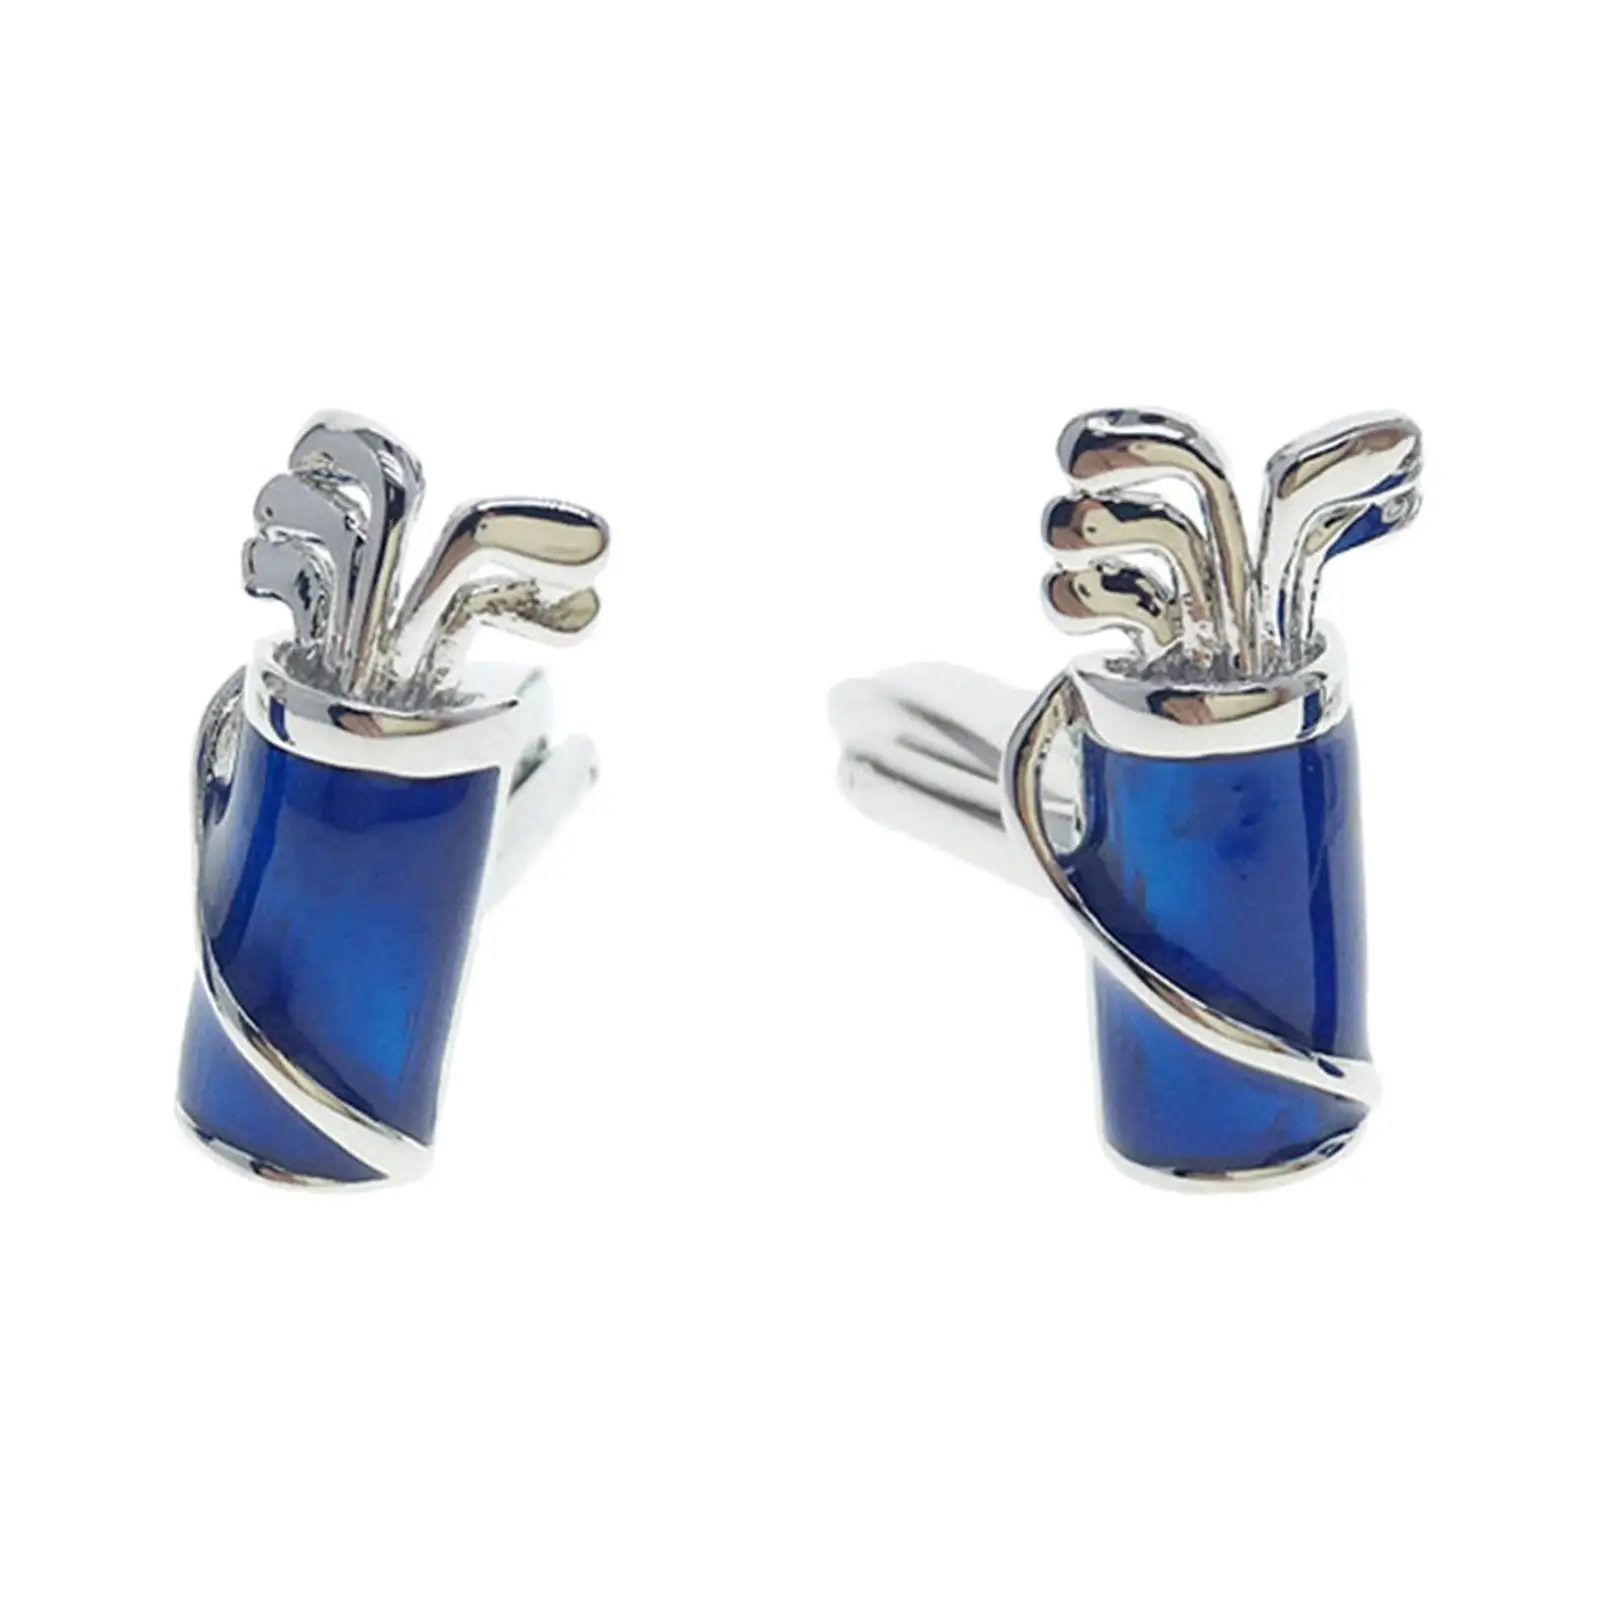 Cufflinks Classy Accessories Unique Jewelry Elegant ,Stylish Classic for Wedding Mens Business ,Groom ,Gift